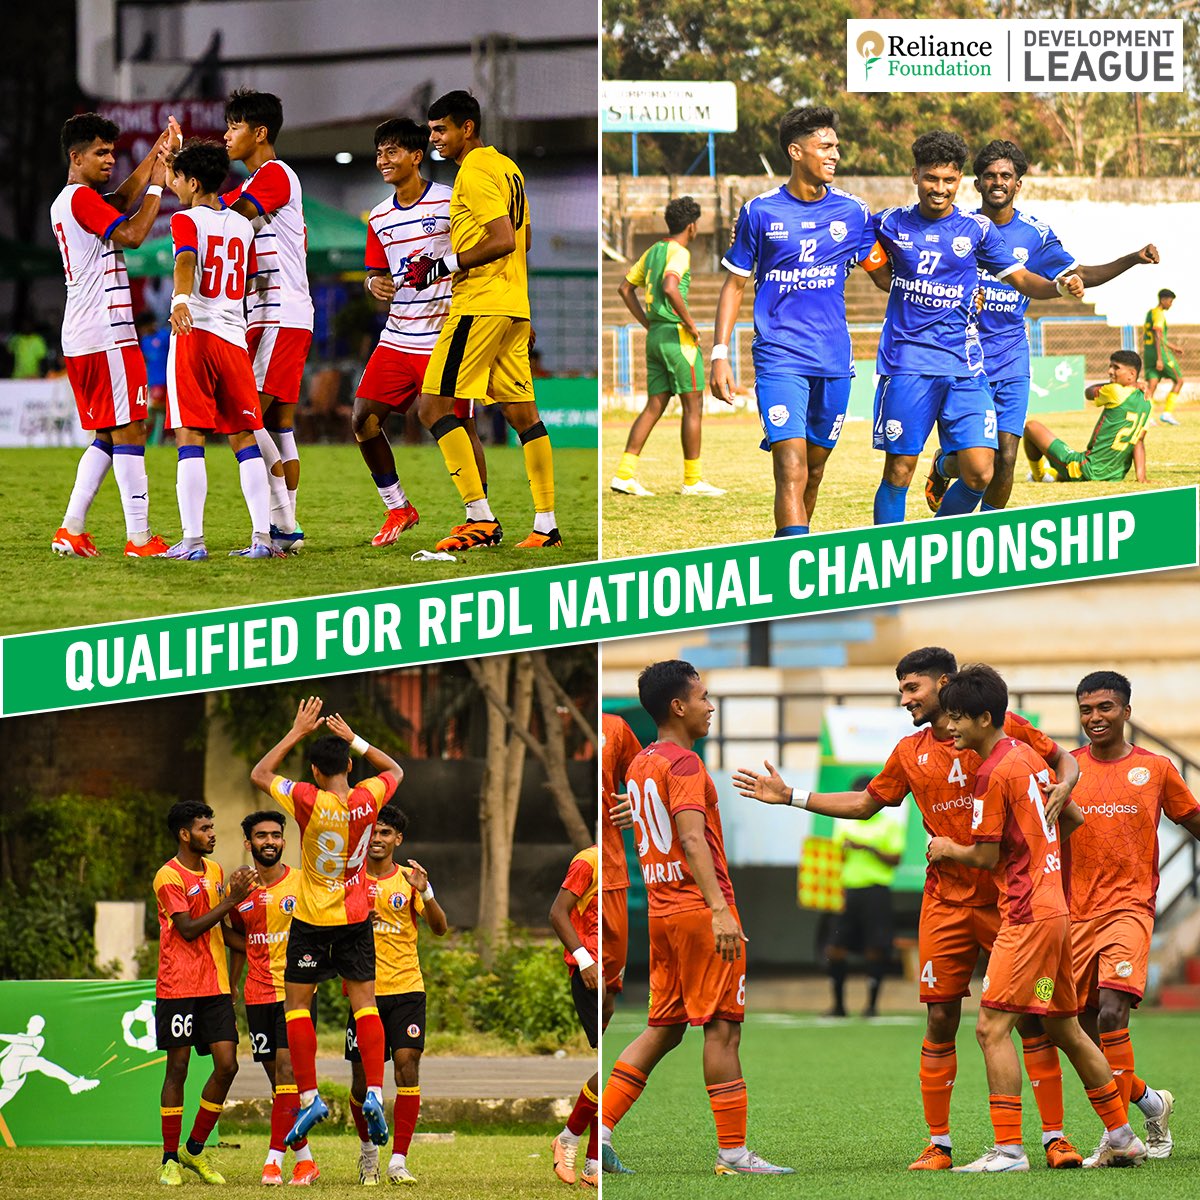 𝐓𝐡𝐞𝐧 𝐭𝐡𝐞𝐫𝐞 𝐰𝐞𝐫𝐞 𝐅𝐎𝐔𝐑 4️⃣ Which of these four teams are you backing to win the #RFDLNationalChampionship 🤔 @ril_foundation | #RelianceFoundationDevelopmentLeague #RFSports #LetsPlay #Football #BengaluruFC #MuthootFA #EastBengalFC #PunjabFC